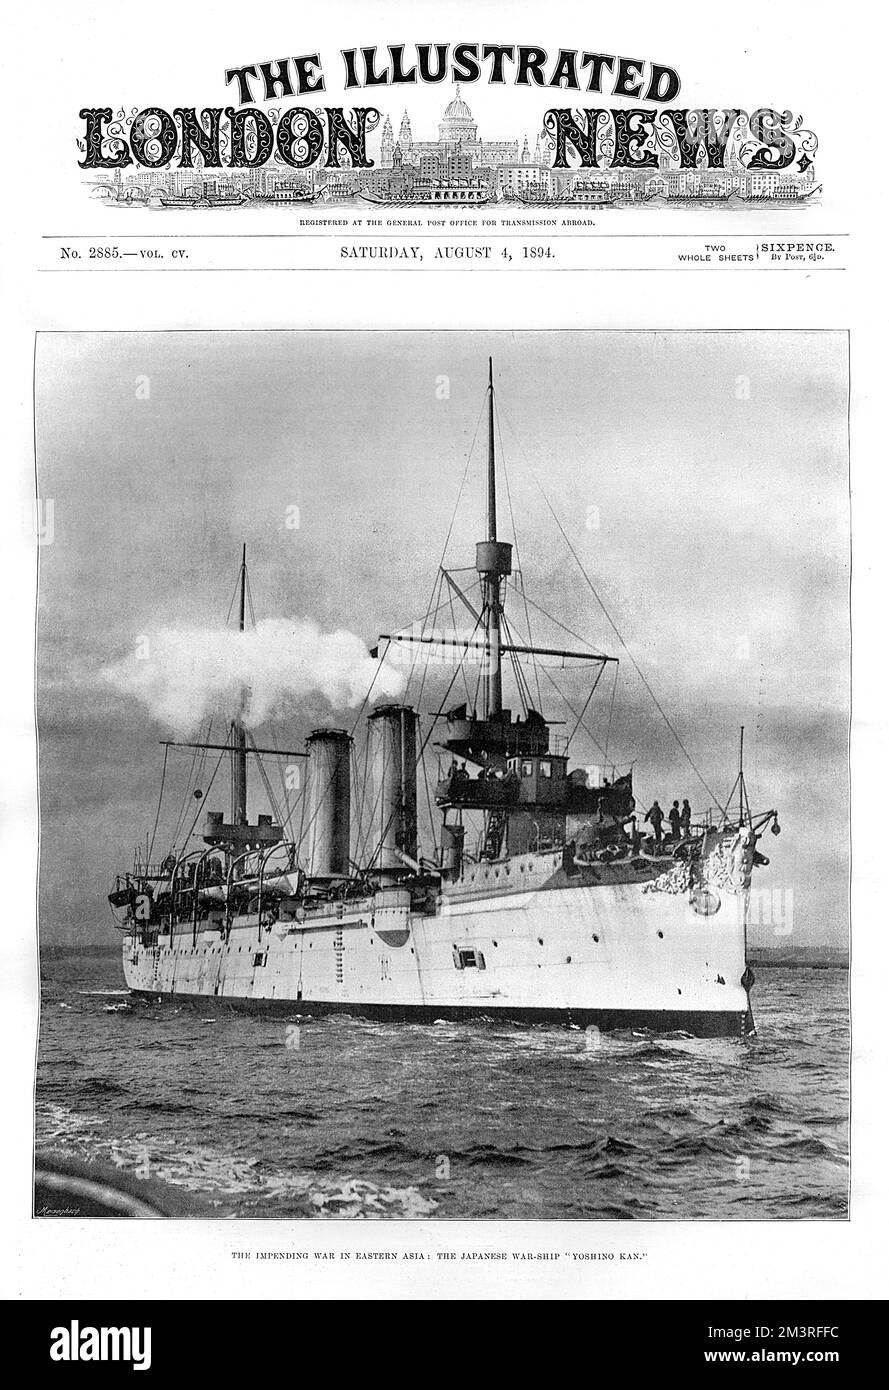 First Sino-Japanese War (1st August 1894 ?? 17th April 1895). The Japanese warship Yoshino Kan on the cover of the Illustrated London News, 4th August 1894. The first Sino-Japanese War was fought primarily for control of Korea between the Empire of Japan and the Qing Empire of China.     Date: 1894 Stock Photo